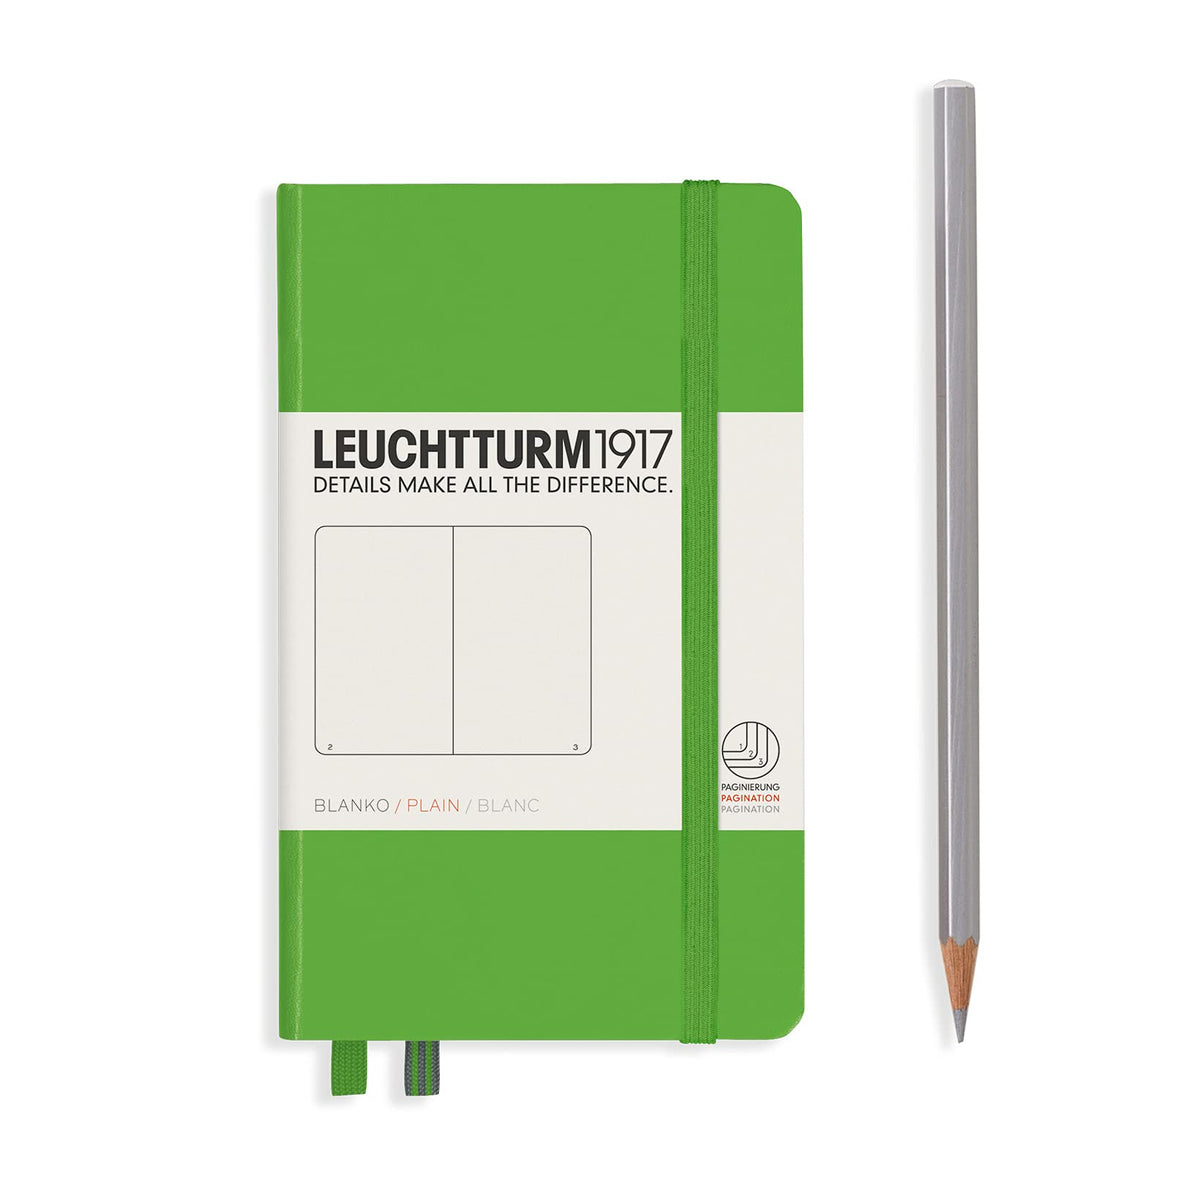 LEUCHTTURM1917 357487 Notebook Pocket (A6), Hardcover, 187 Numbered Pages, Plain, Fresh Green